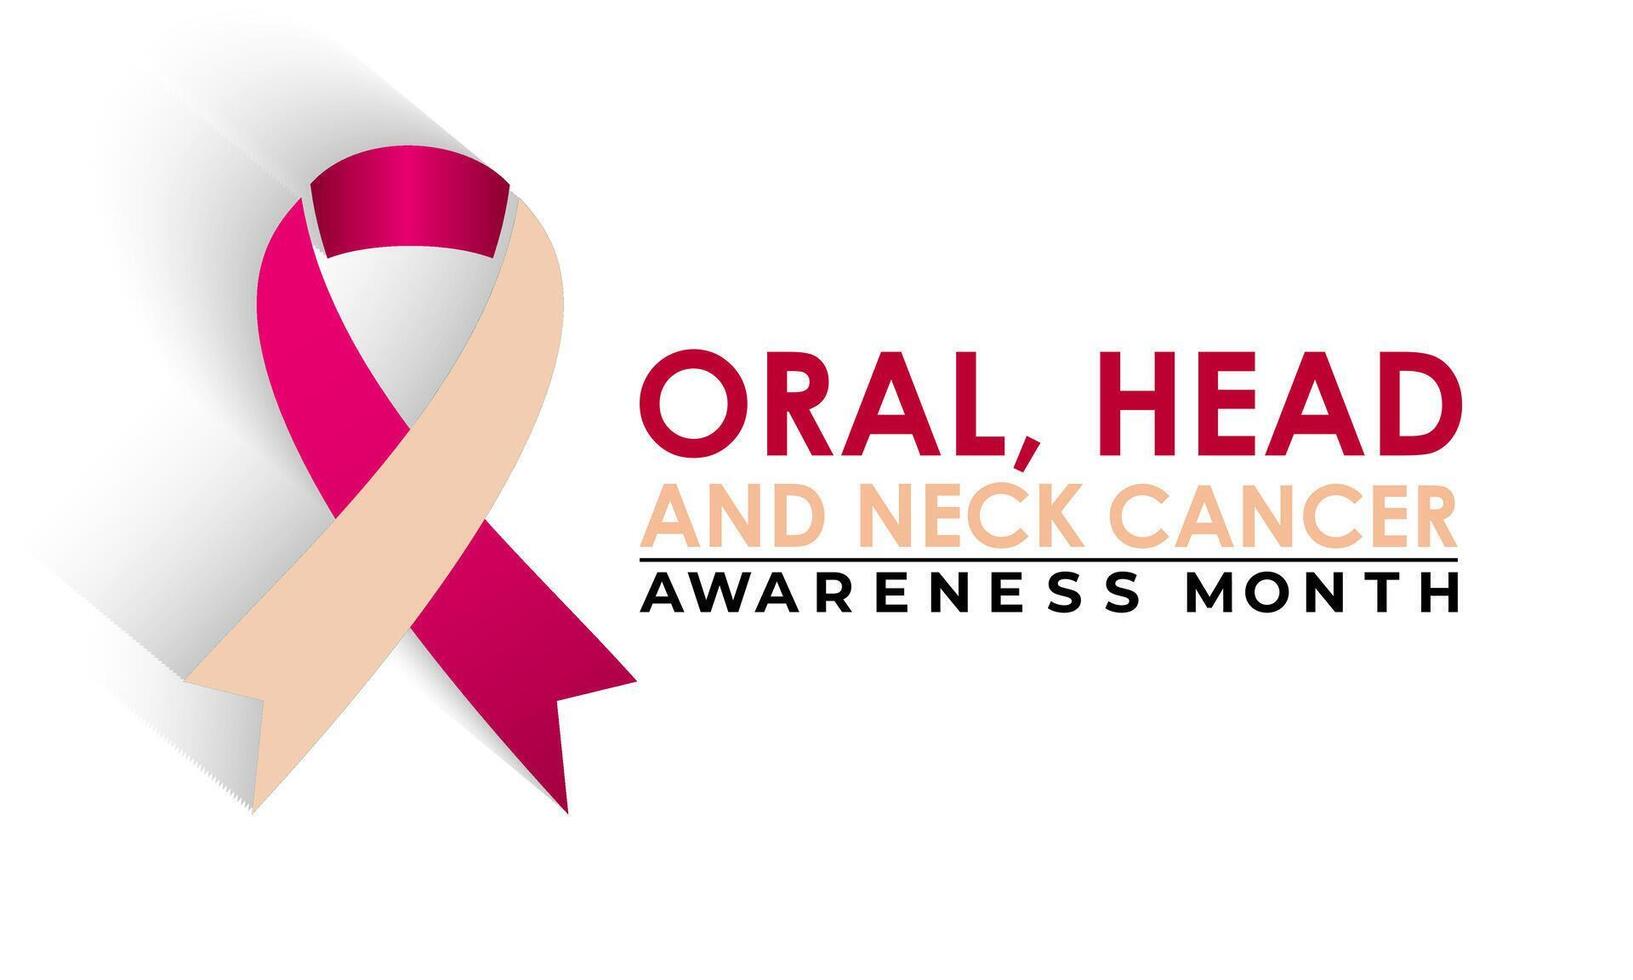 Oral, Head and Neck cancer awareness month observed each year in April. Greeting card, Banner poster, flyer and background design. vector